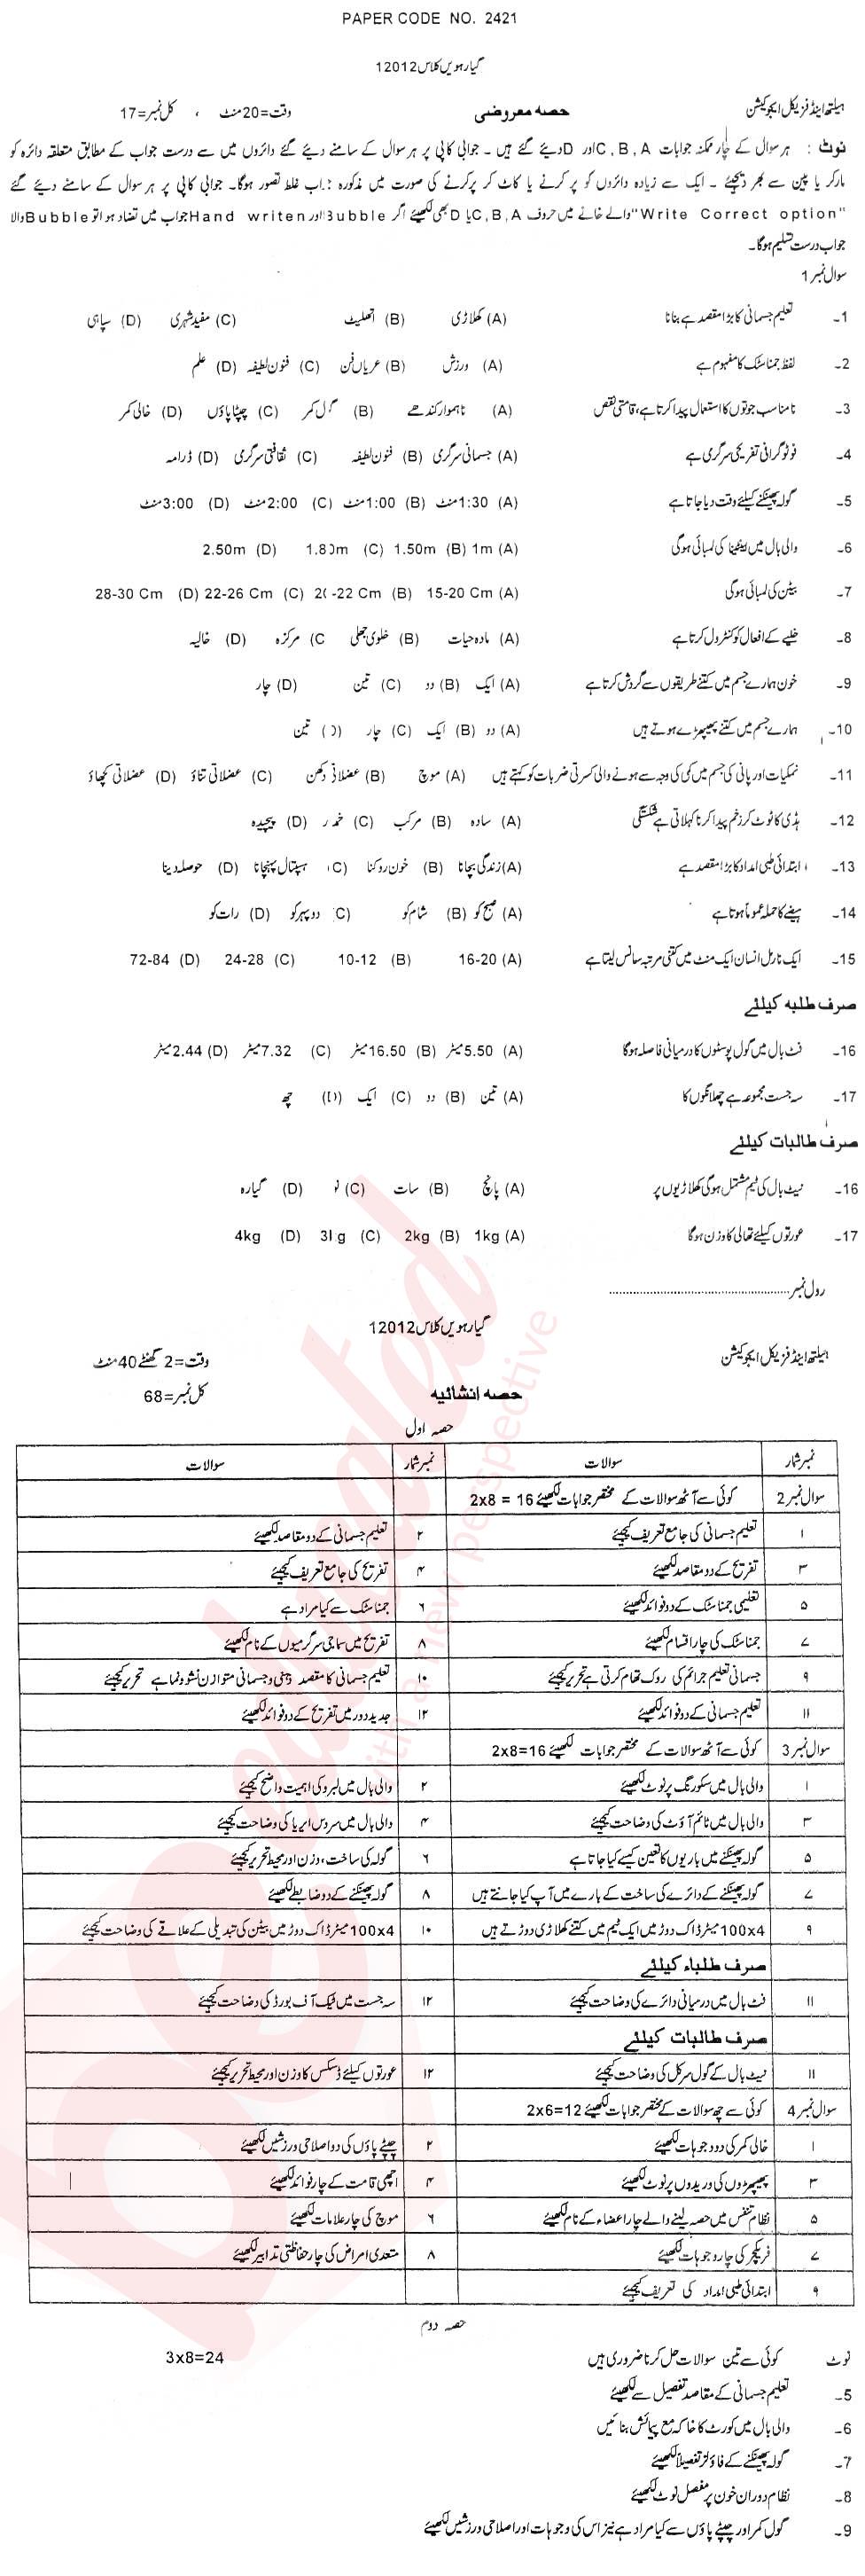 Health and Physical Education FA Part 1 Past Paper Group 1 BISE DG Khan 2012